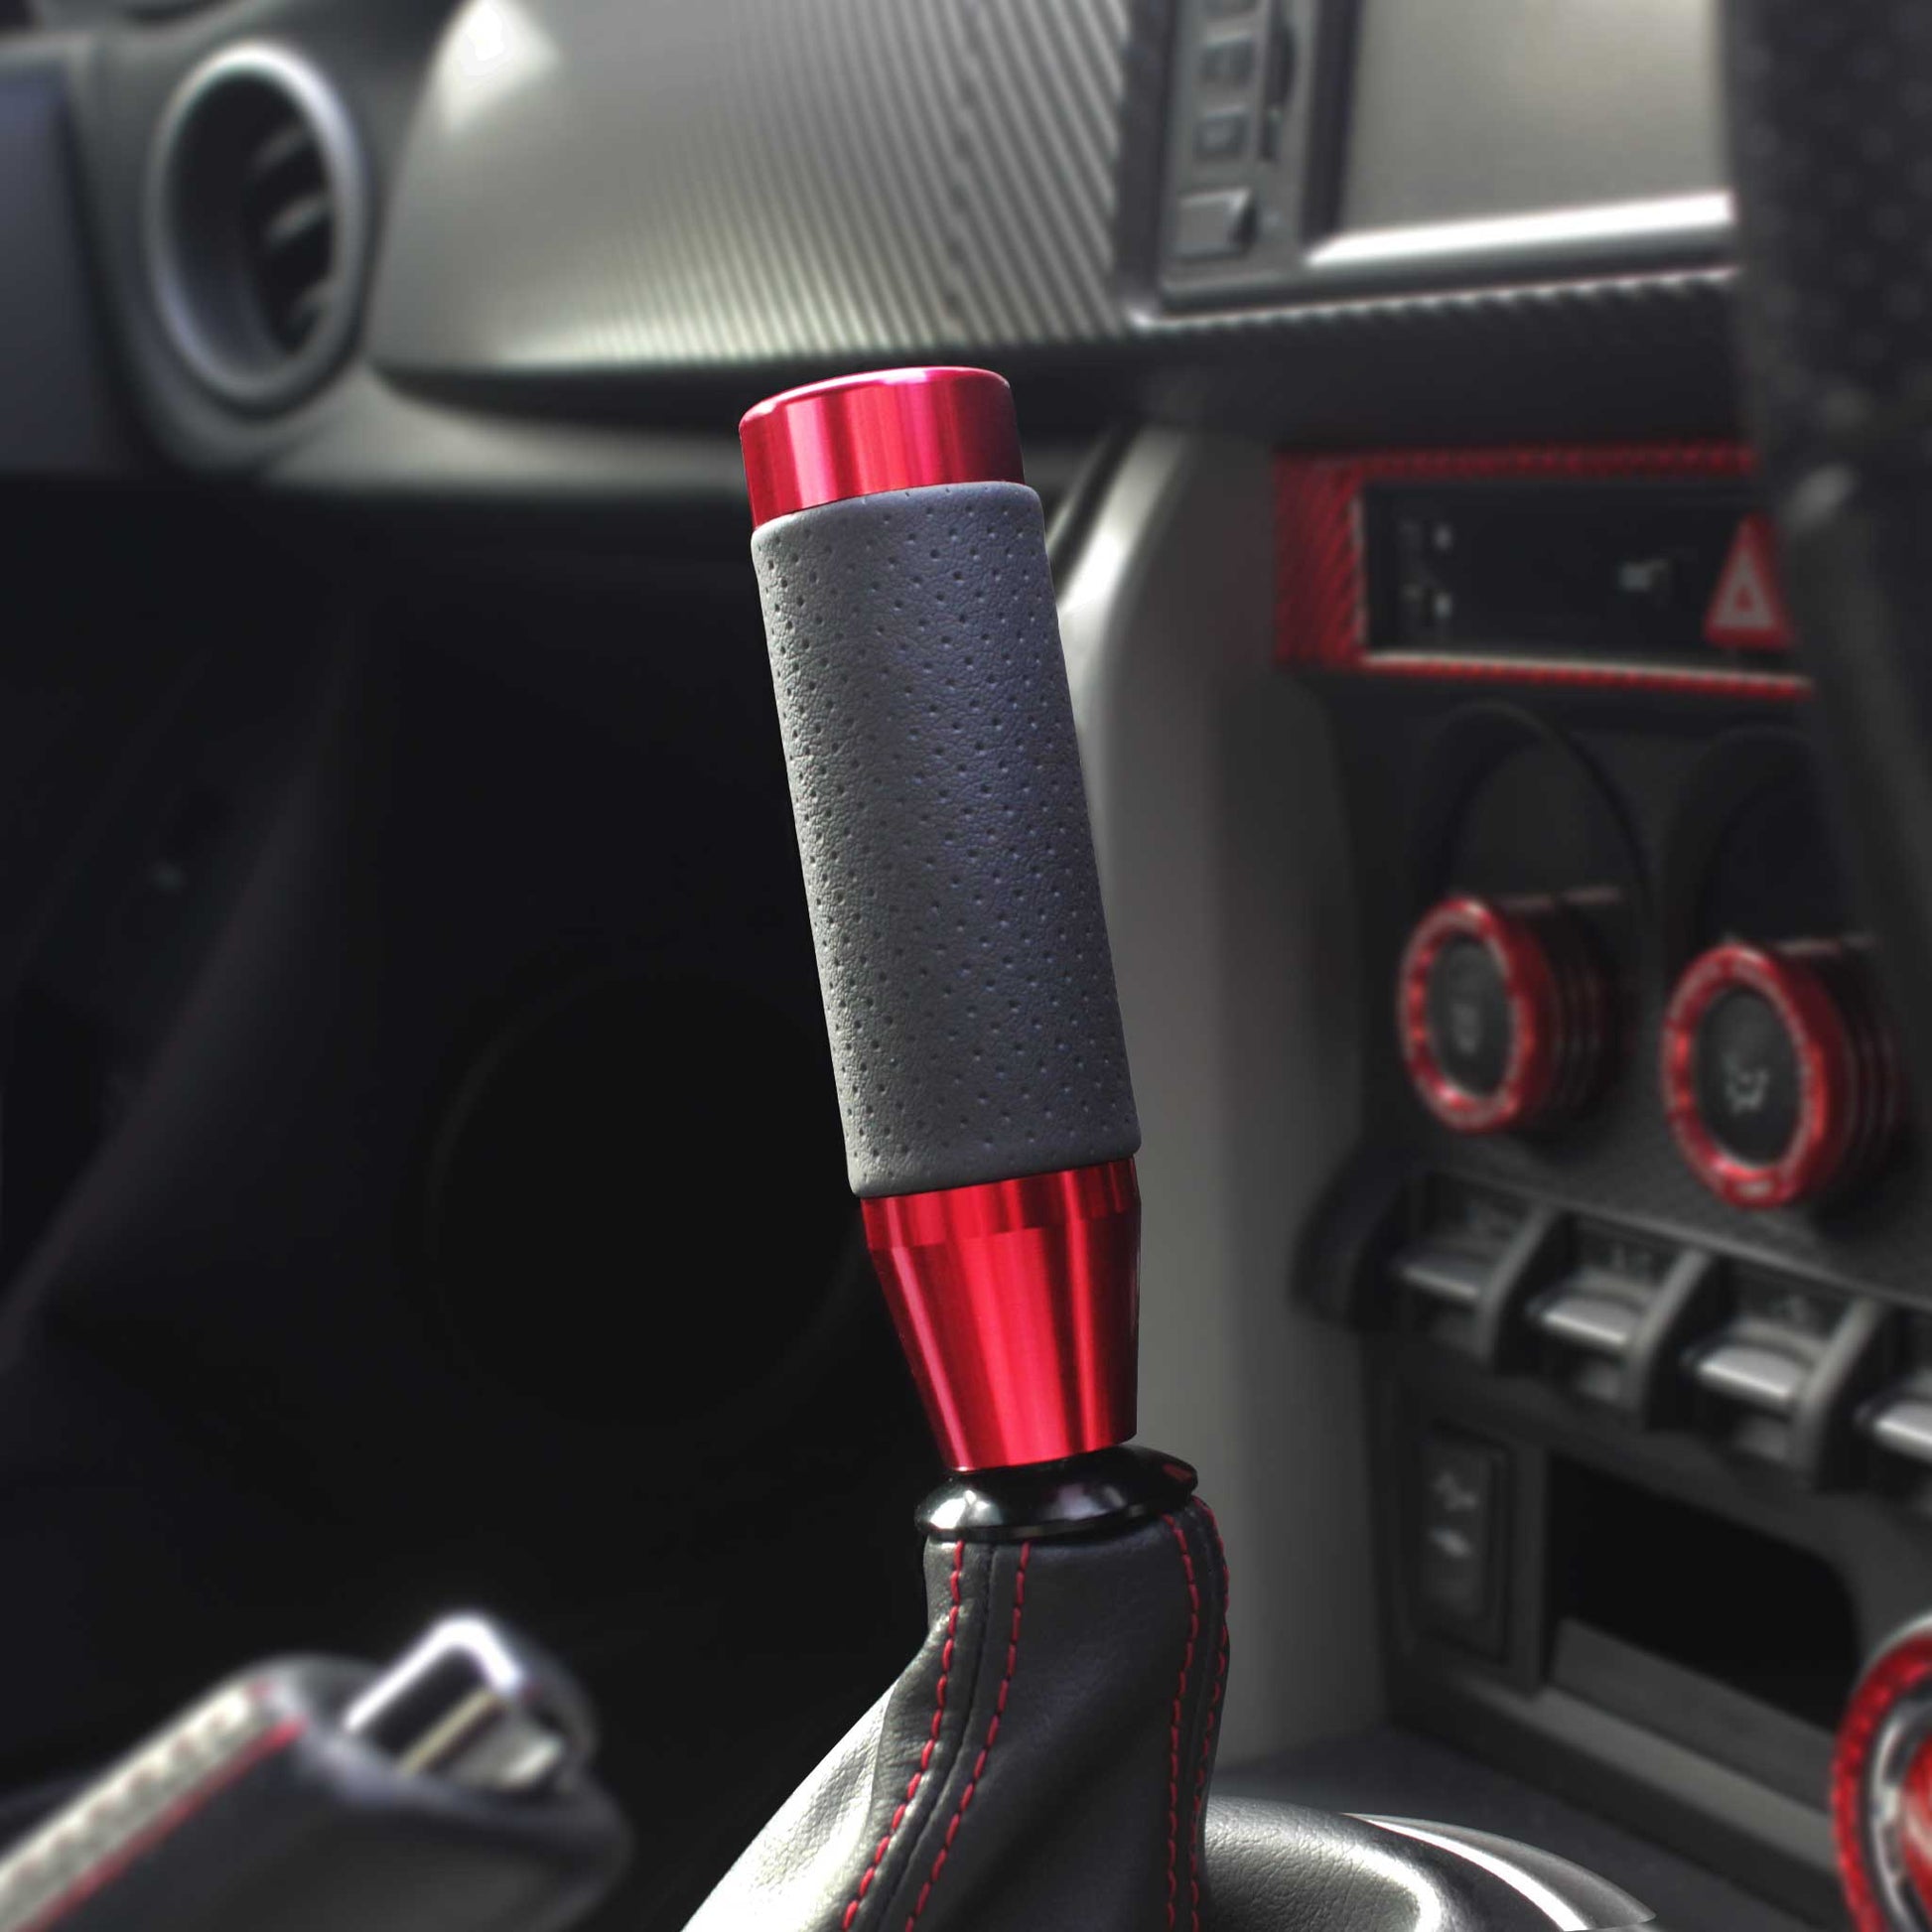 A red leather grip shift knob is installed on an auto Toyota 86 seamlessly